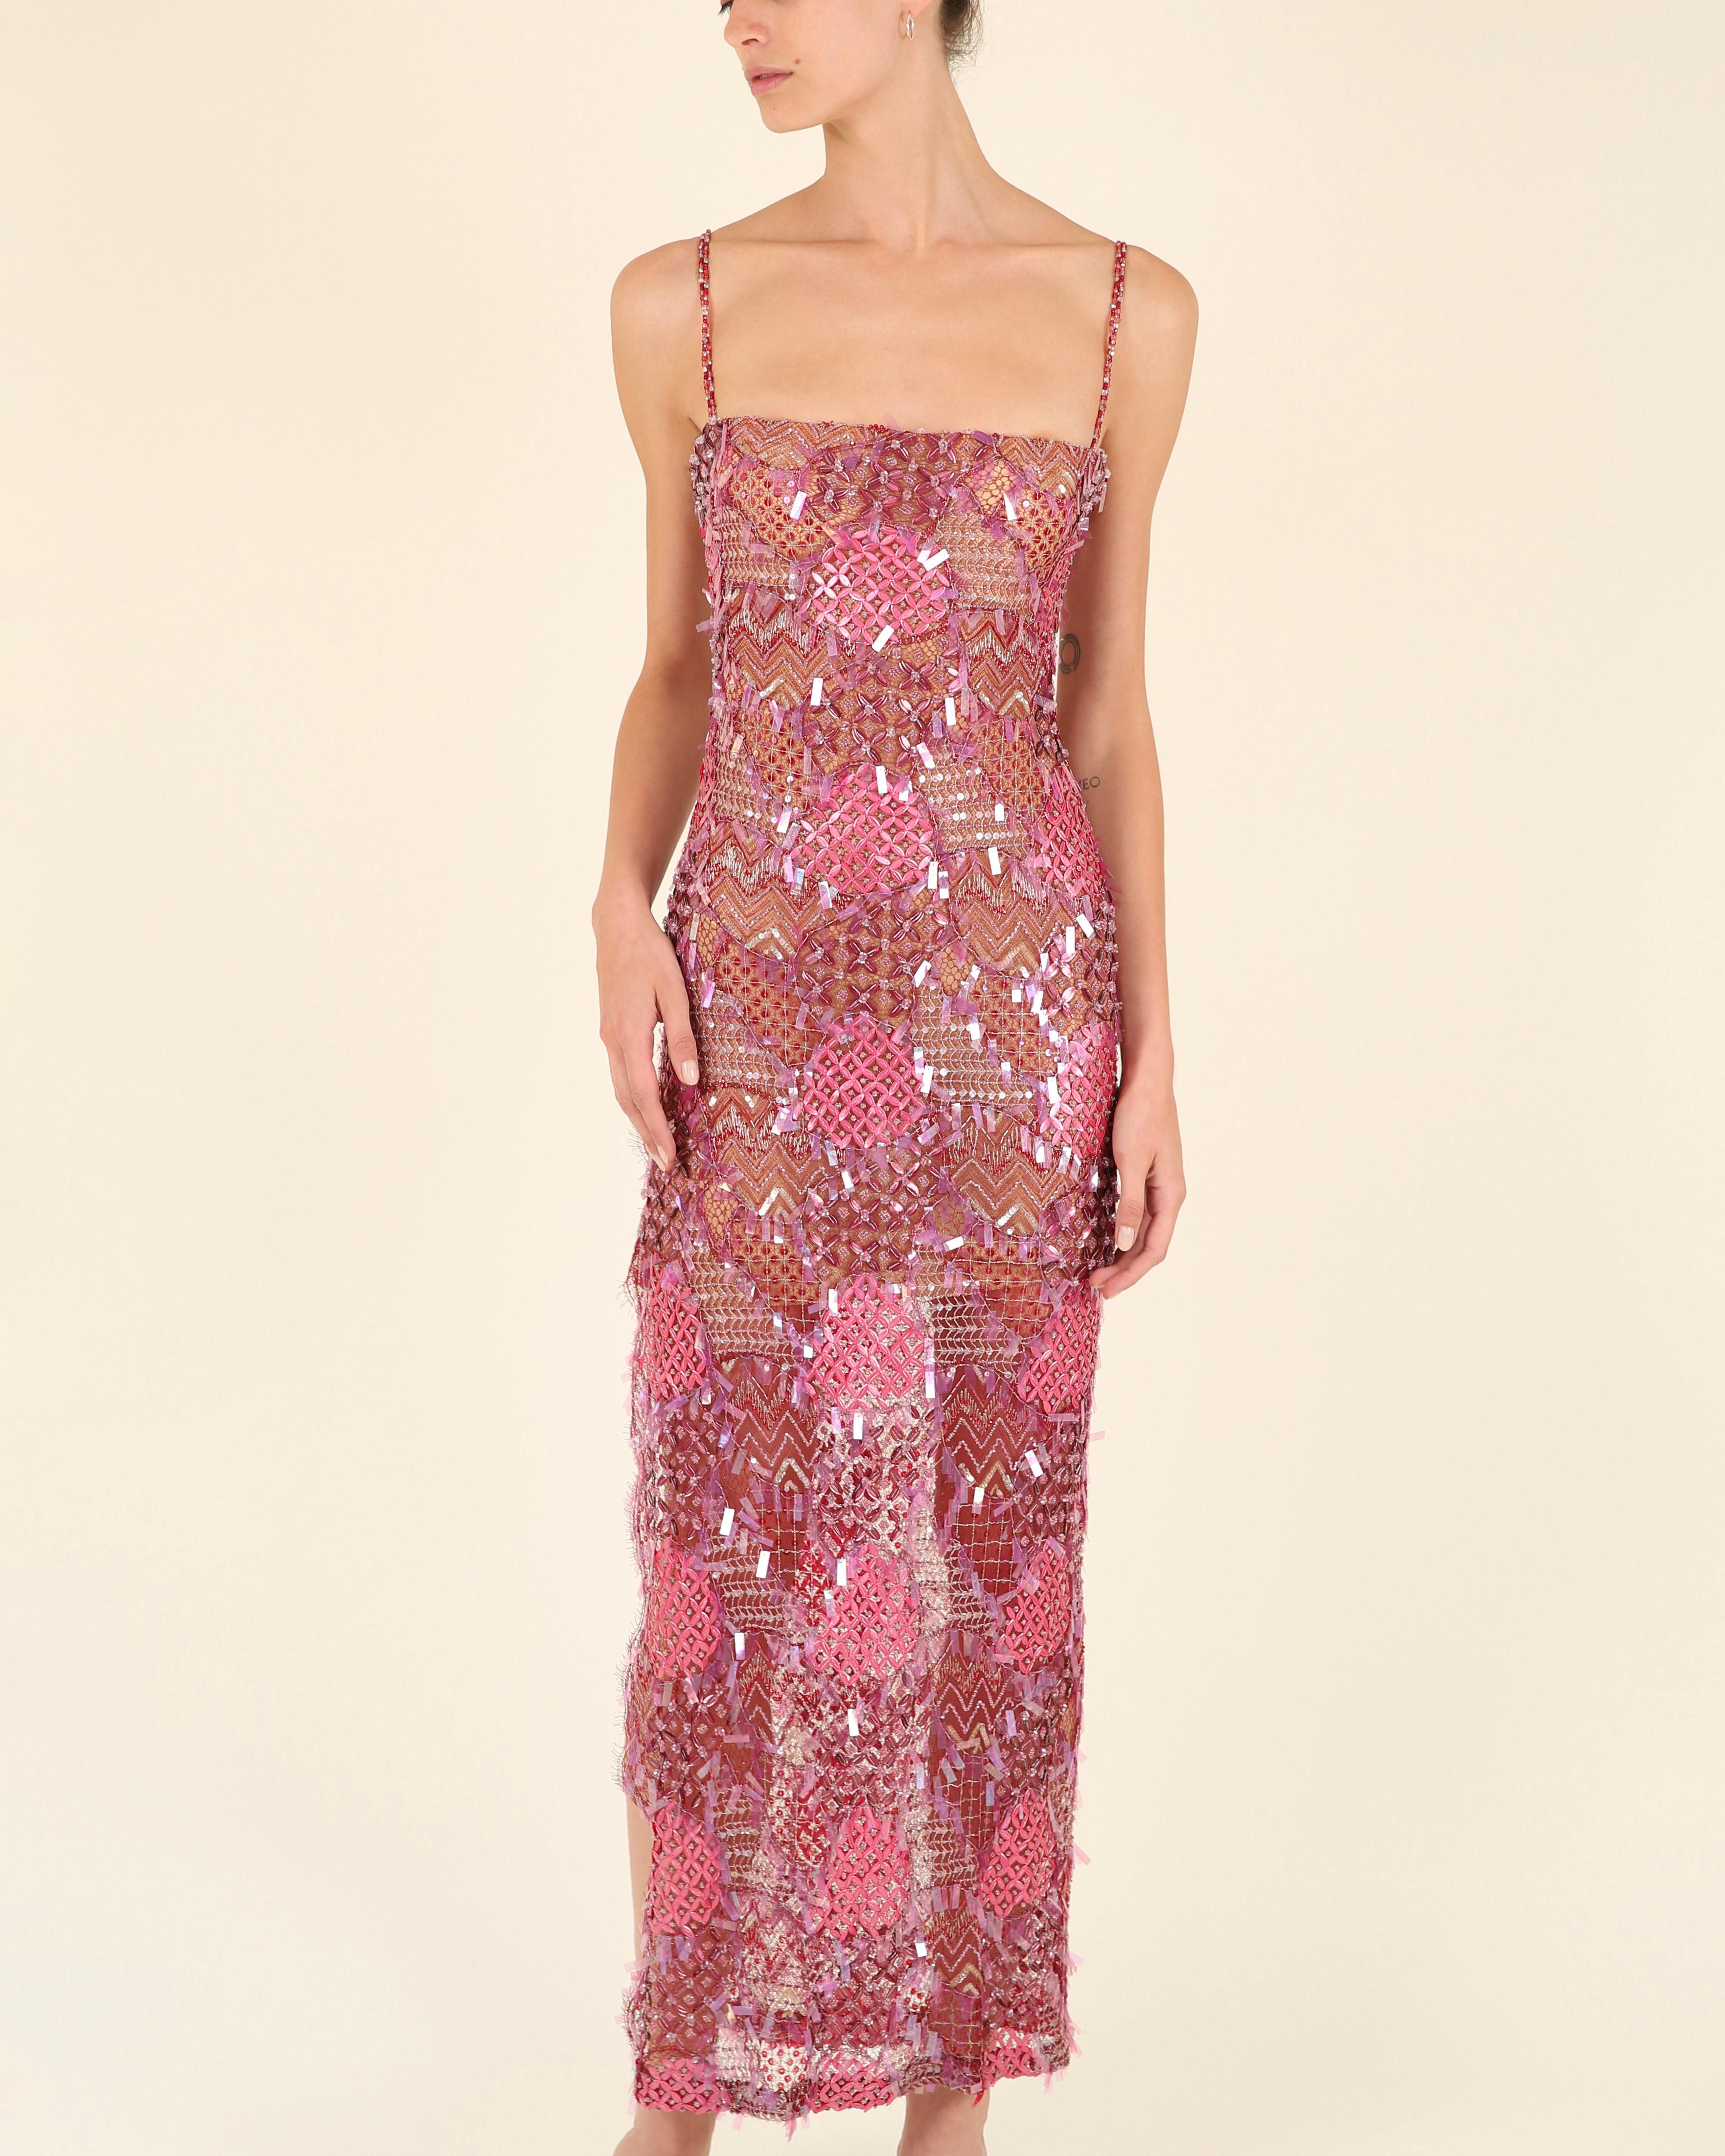 Loris Azzaro couture pink embellished sequin beaded sheer slit bustier dress XS In Excellent Condition For Sale In Paris, FR